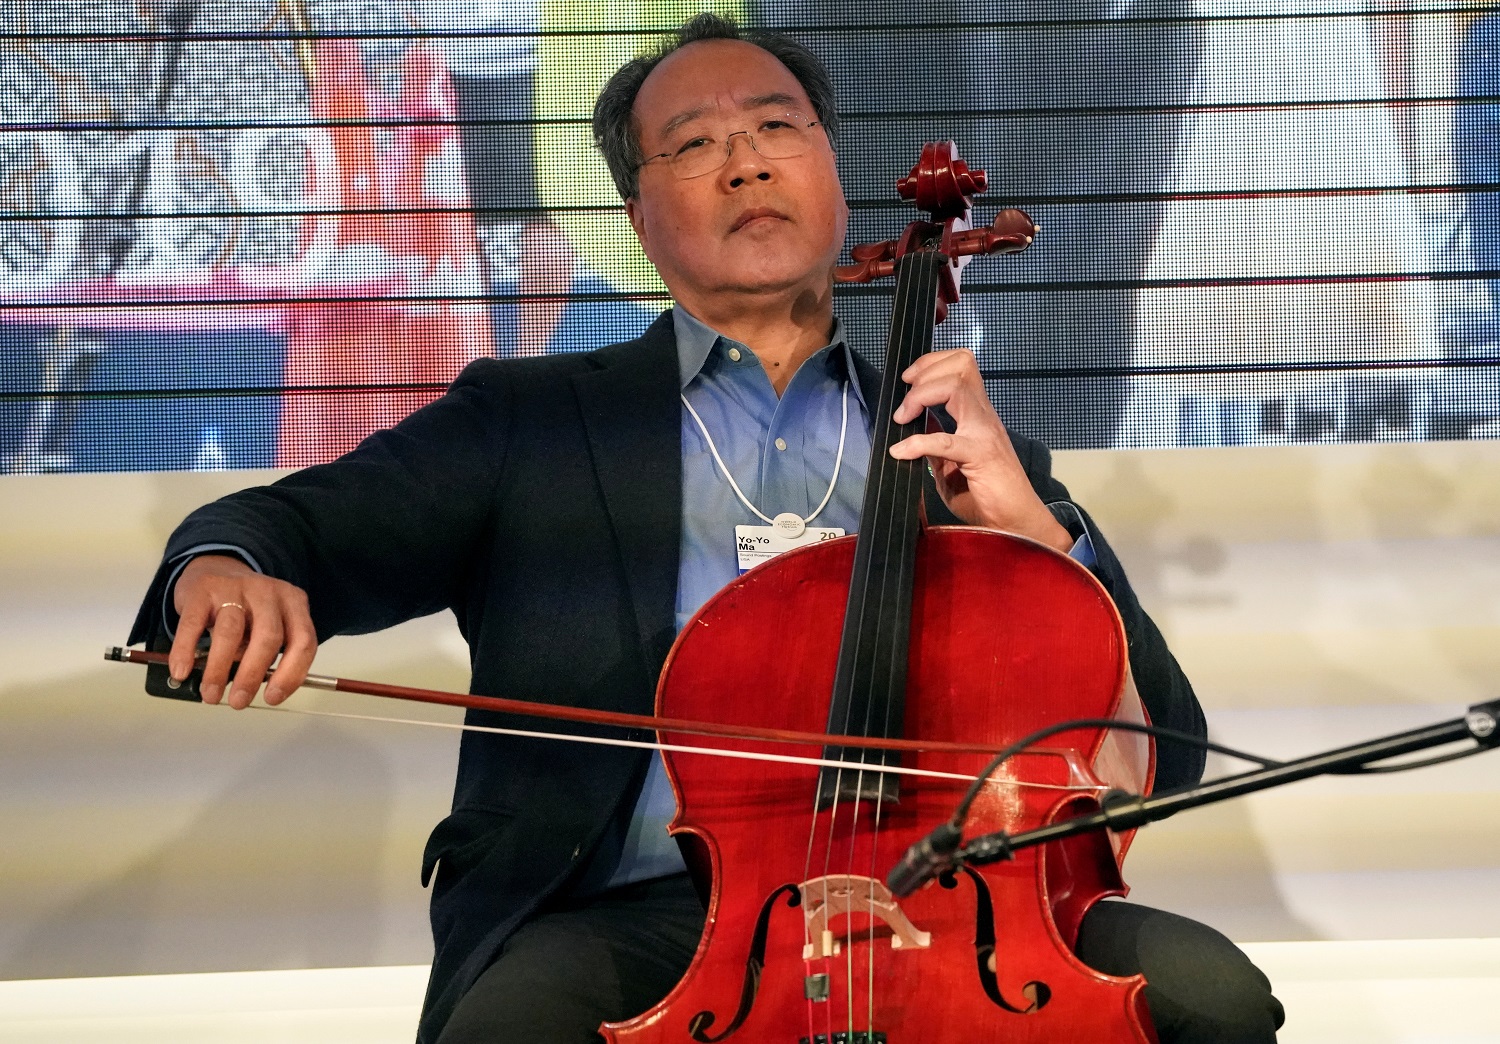 Cellist YoYo Ma offers 'Songs of Comfort and Hope' in duo album Our